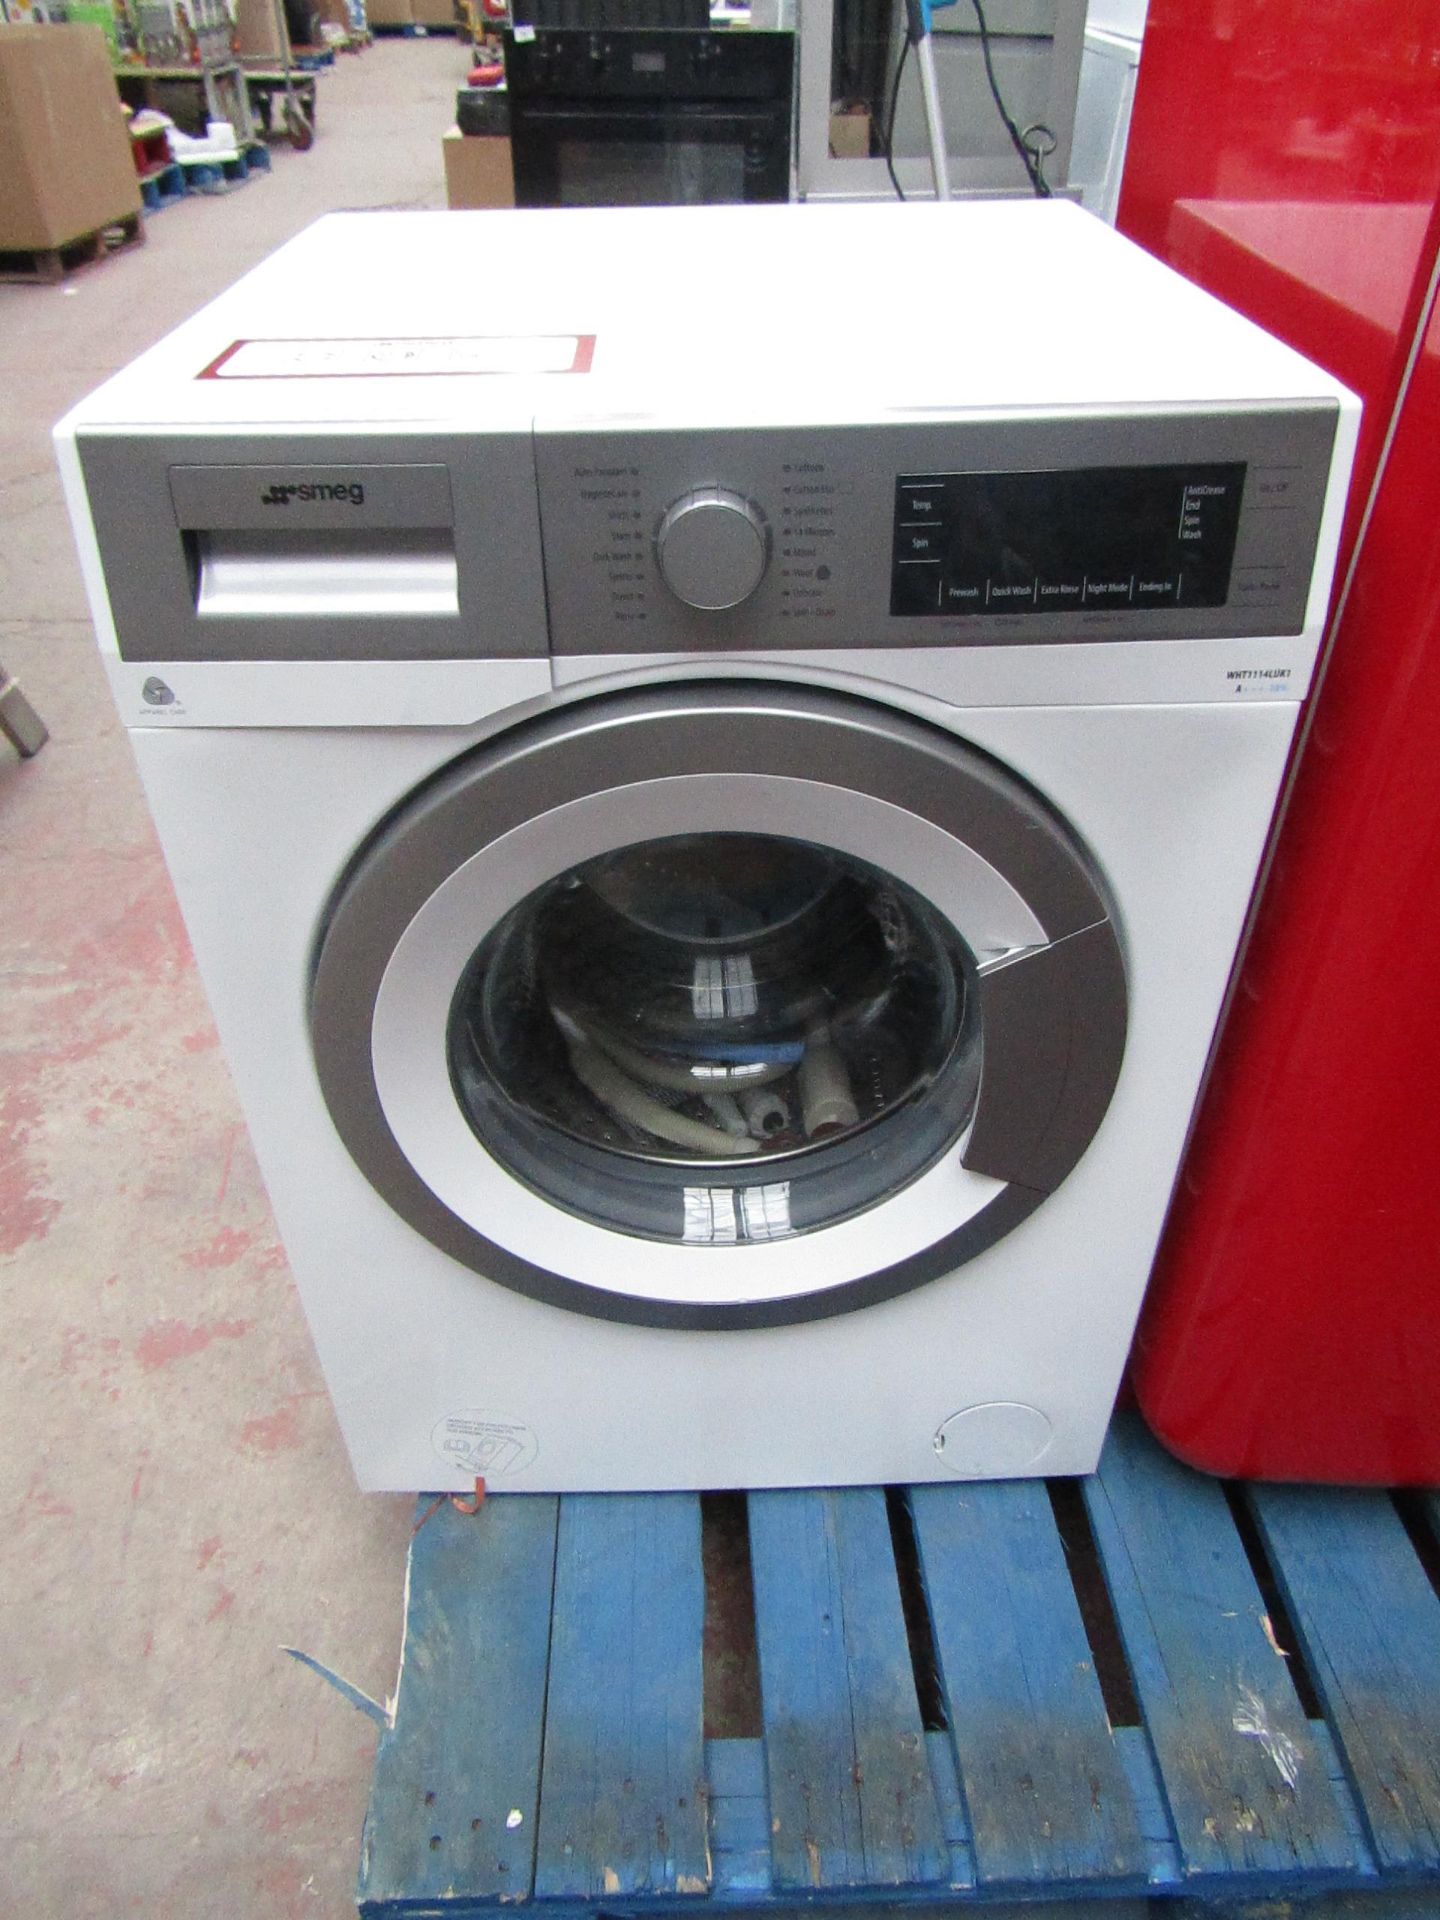 Smeg WHT1114LUK1 11KG washing machine, Fully tested and working, has a few marks on the side but